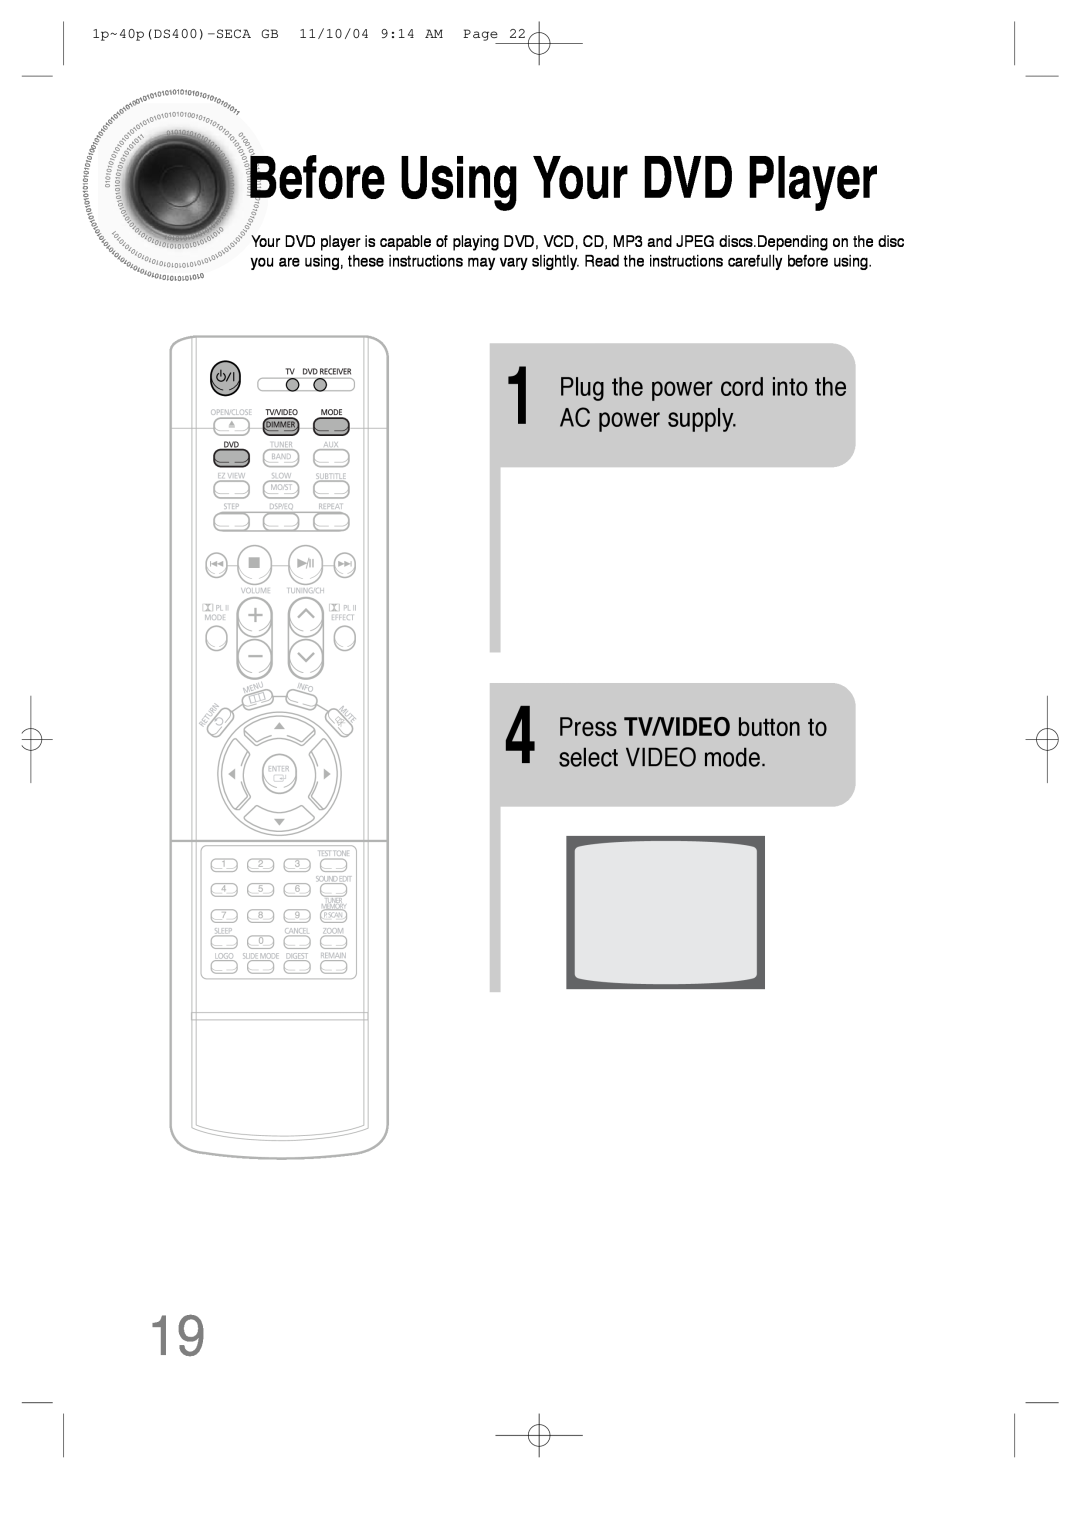 Samsung HT-DS400 instruction manual BeforeUsing Your DVD Player, power supply, Press TV/VIDEO button to select VIDEO mode 